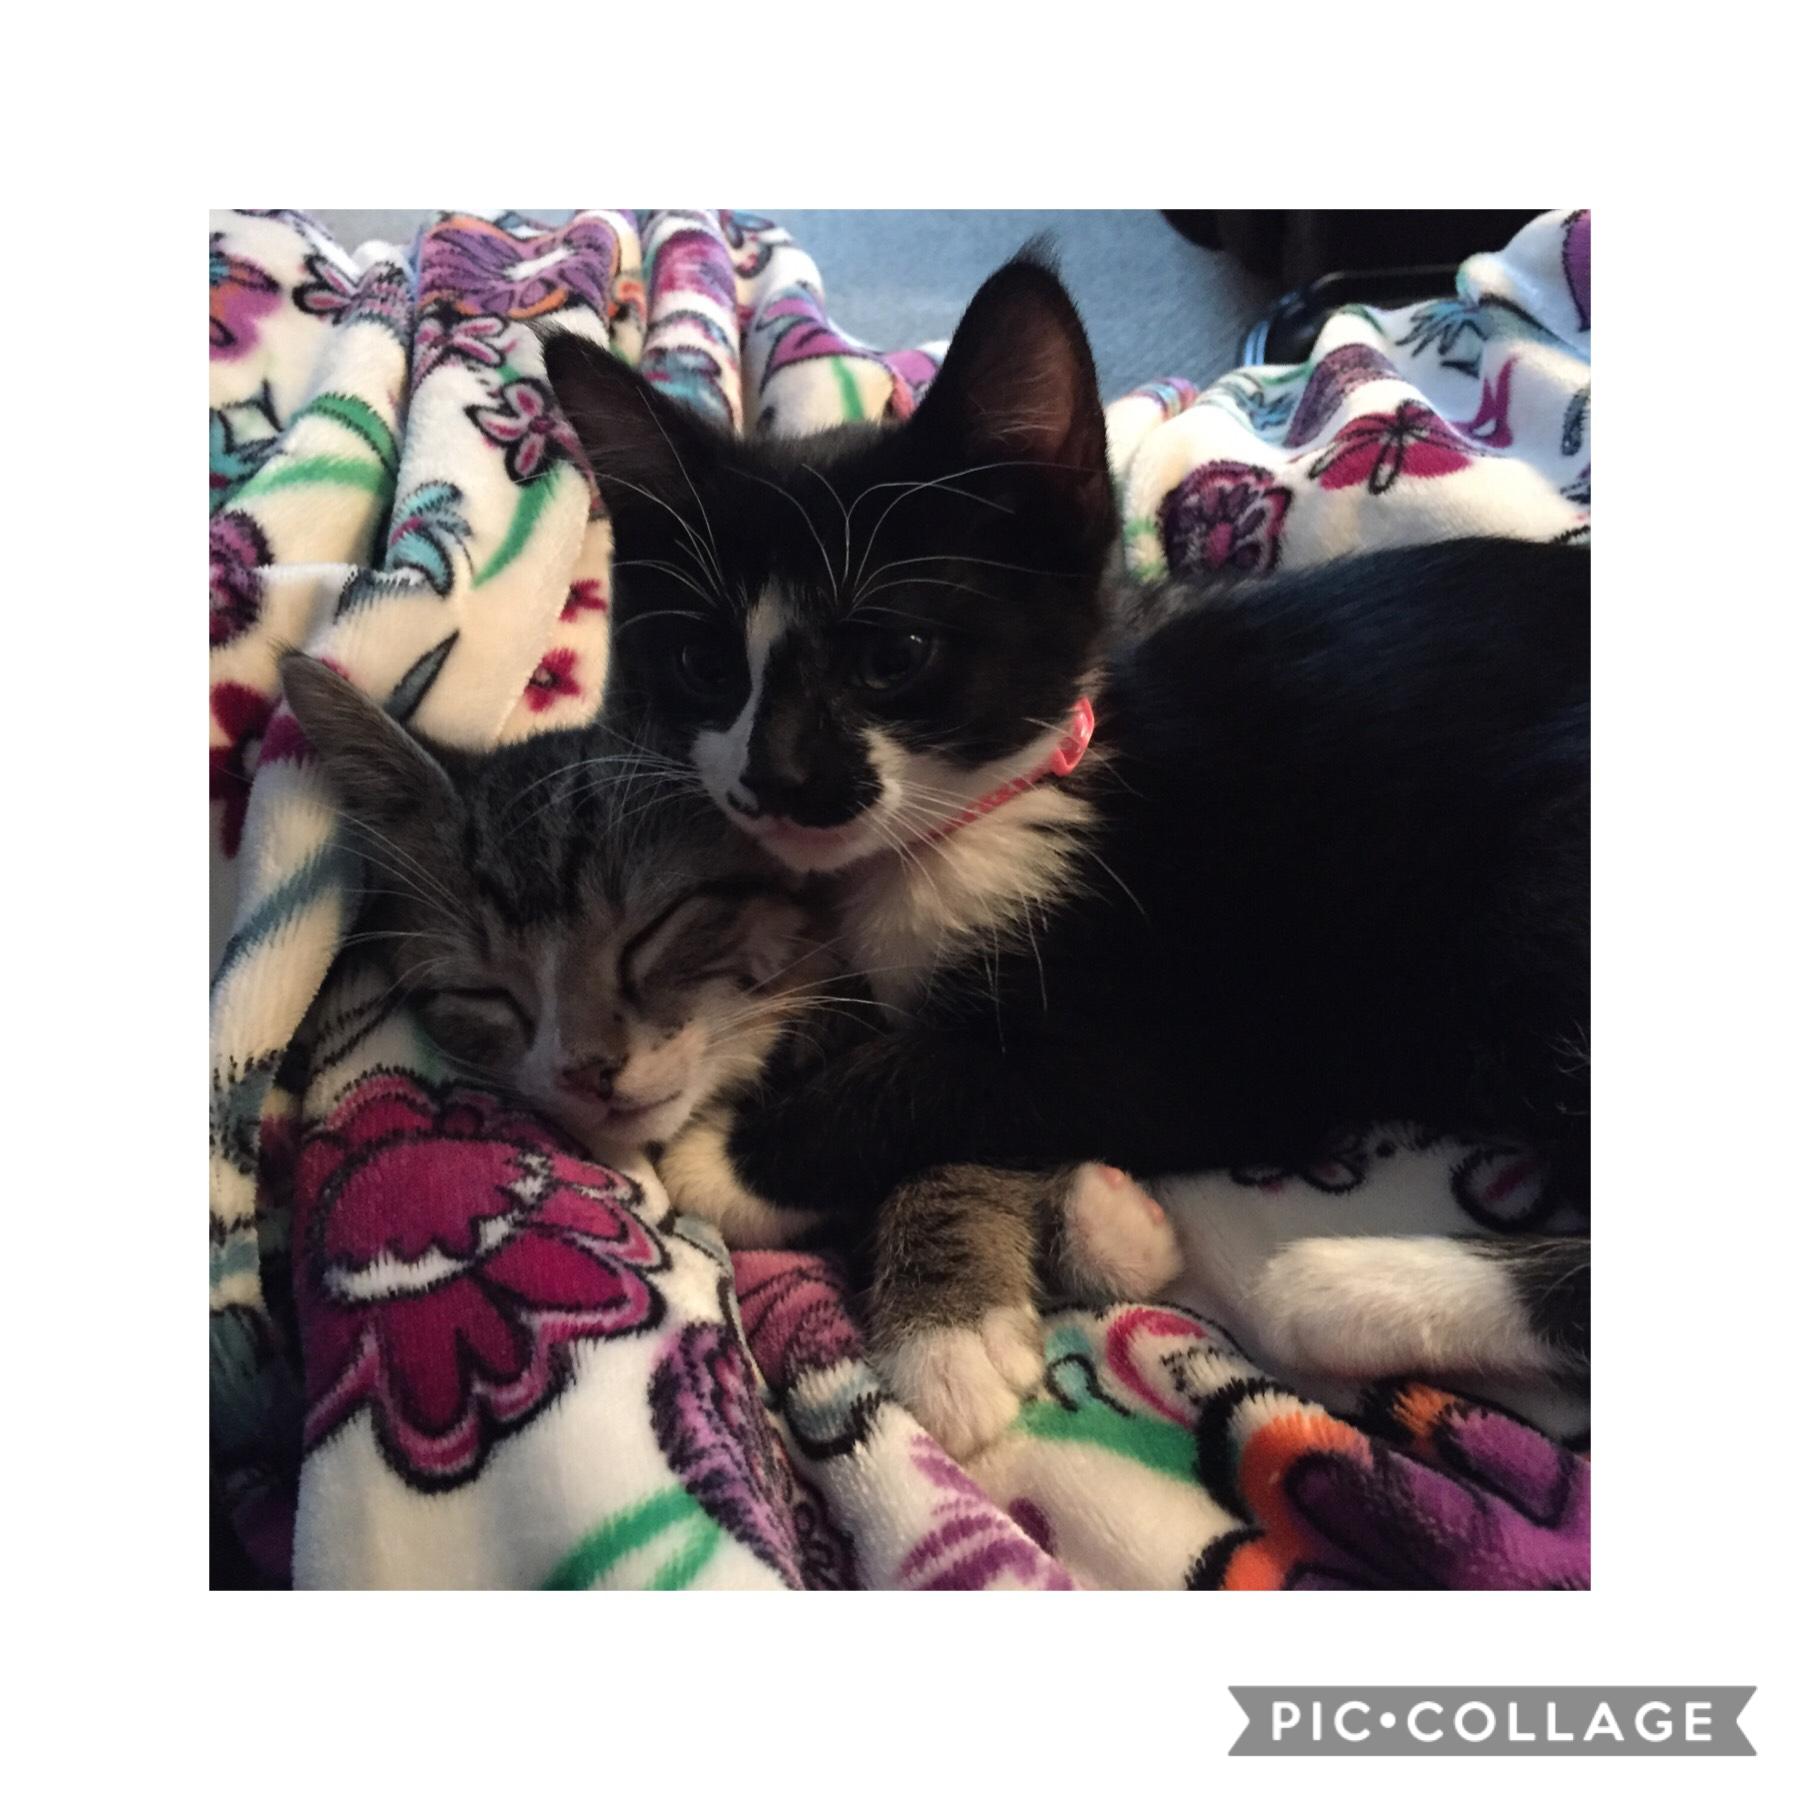 Here is a picture of my cats if you decide to use it for my contest in the other post. Let me know if you want me to make it smaller for you to use it